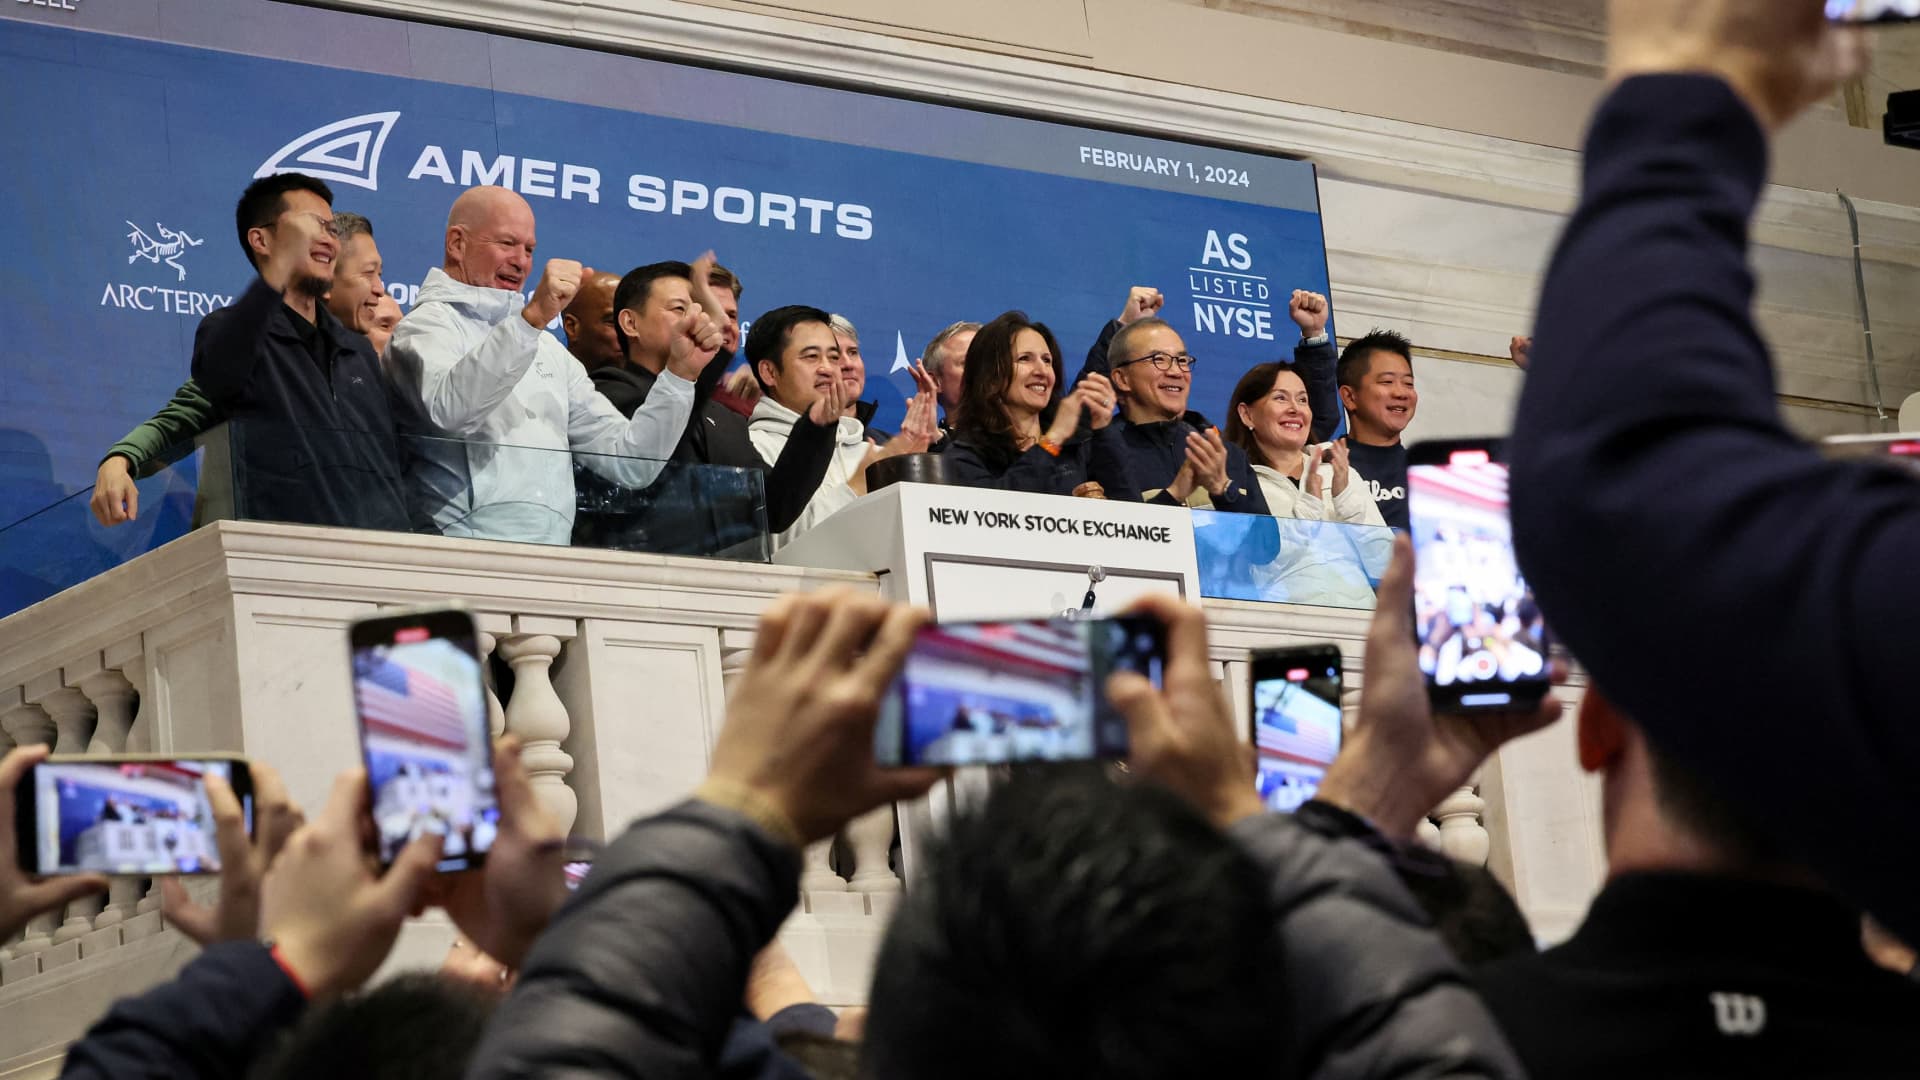 Wilson tennis racket maker Amer Sports opens at $13.40 per share in market debut after pricing IPO at $13